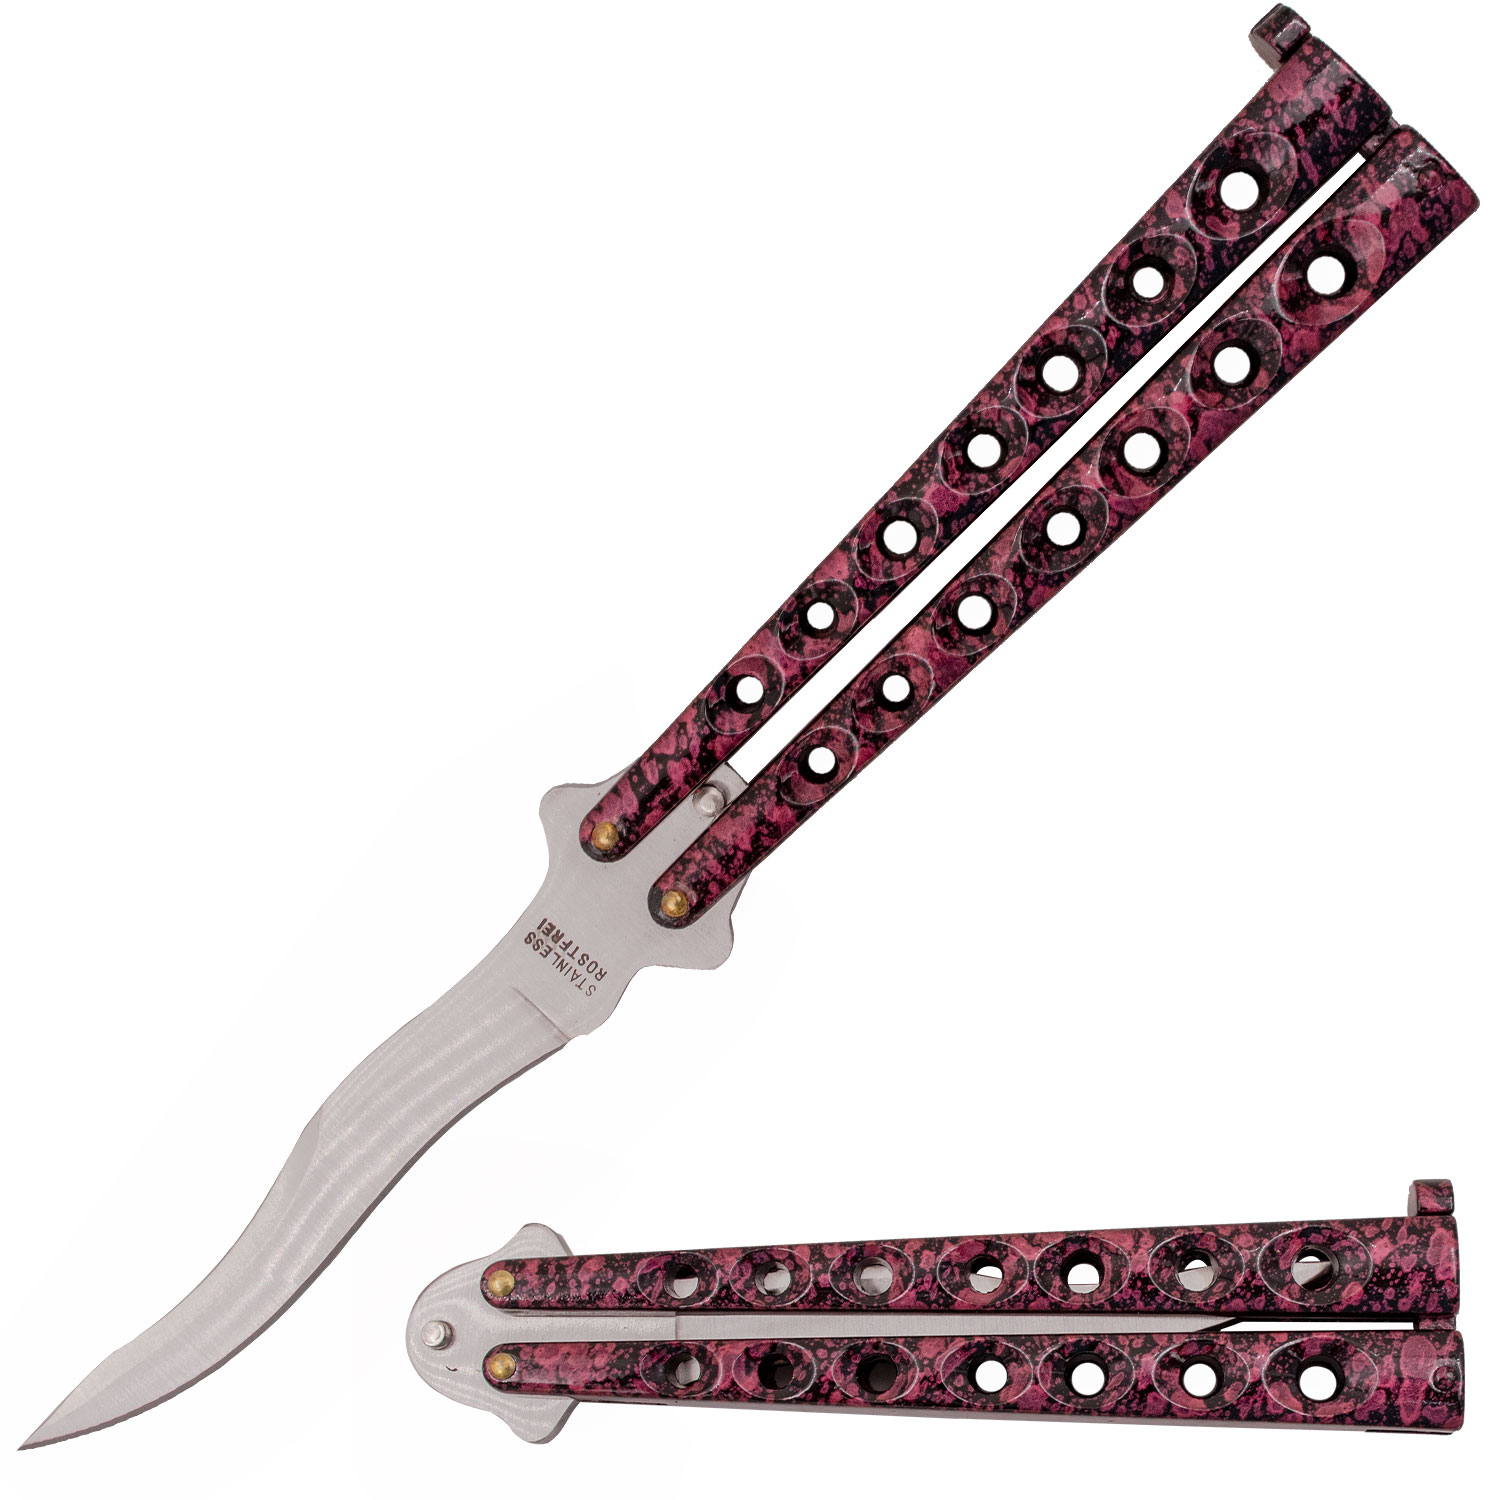 8.8 Inch Kriss Blade Butterfly Knife (Pink)